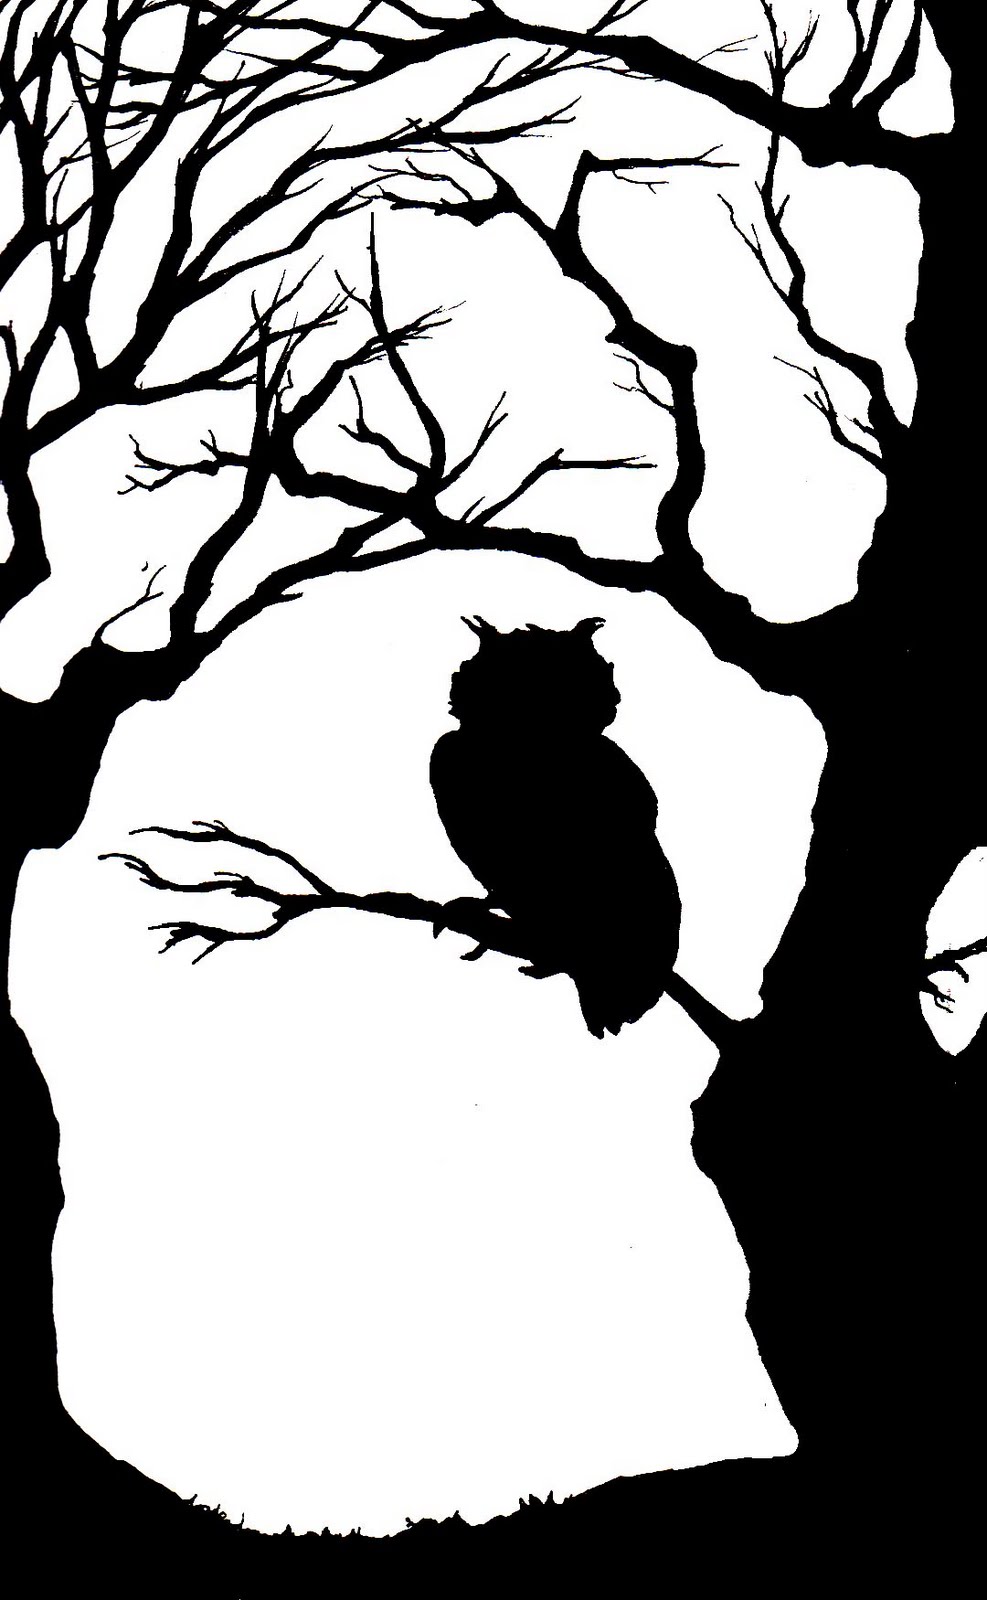 Flying Owl Silhouette   Clipart Panda   Free Clipart Images